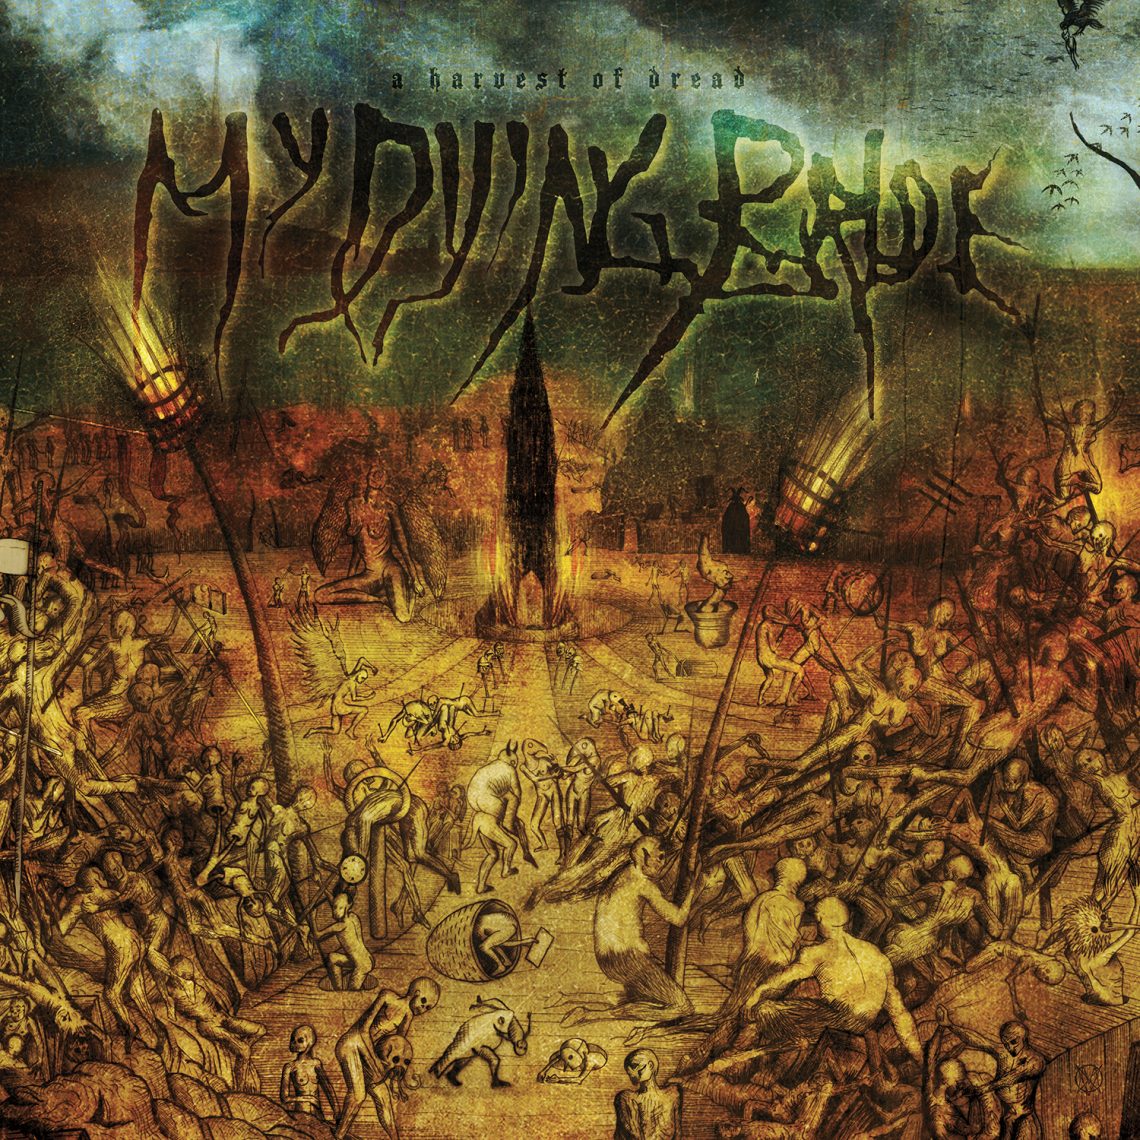 My Dying Bride announce 25 year anniversary and new release ‘A Harvest of Dread’